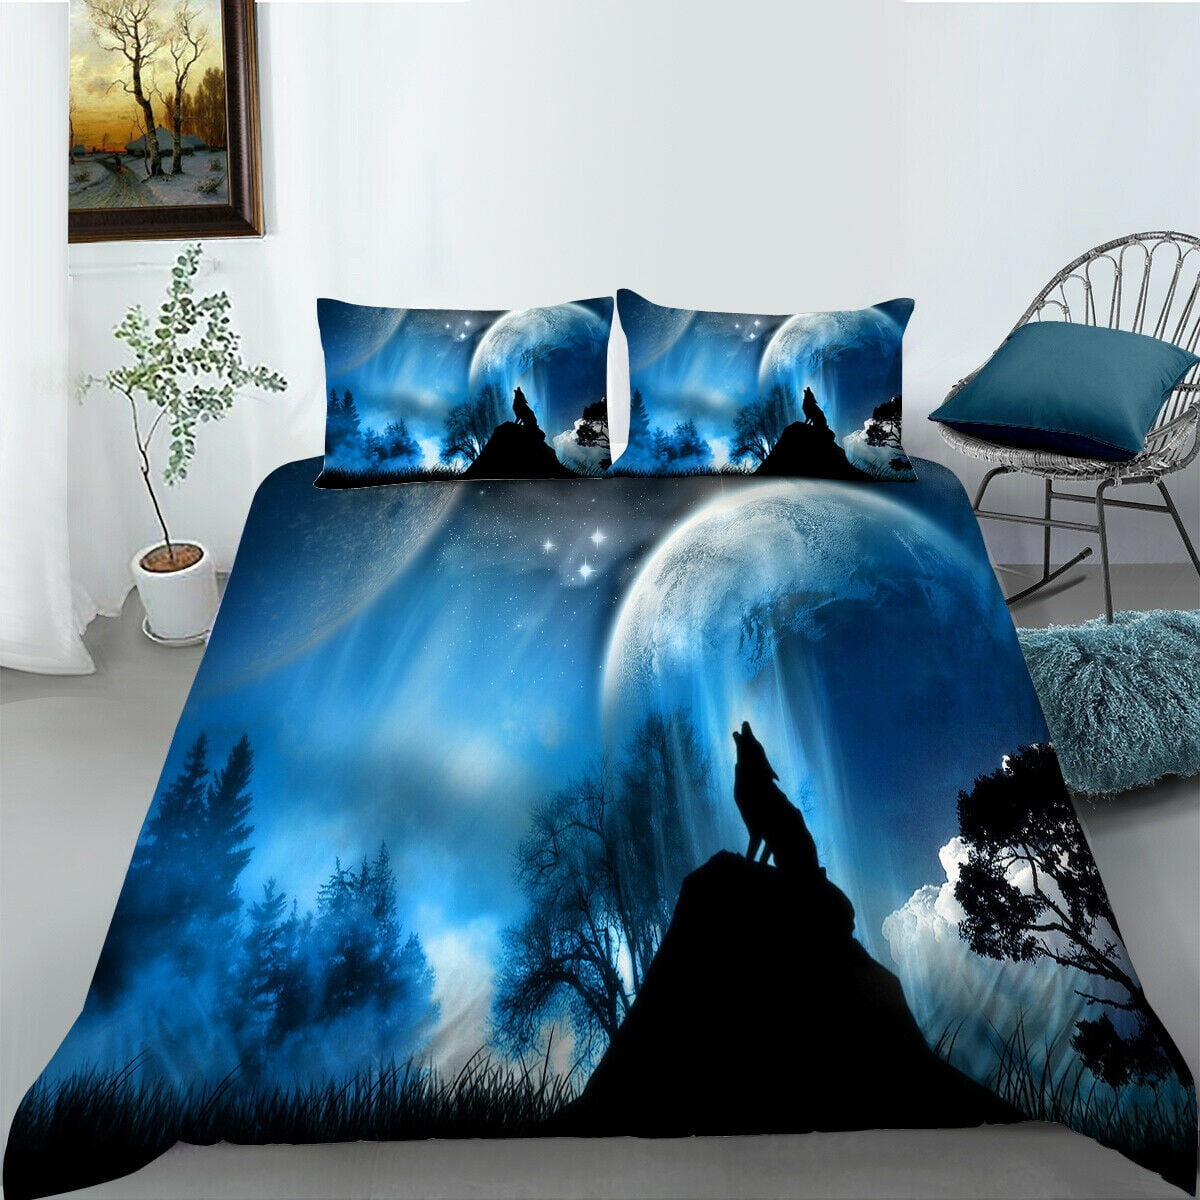 Home Bed Clothes Comforter Cover Set With Pillowcase 3D Moon And Wolf  Painting Creative Bedding Cover,California King (98